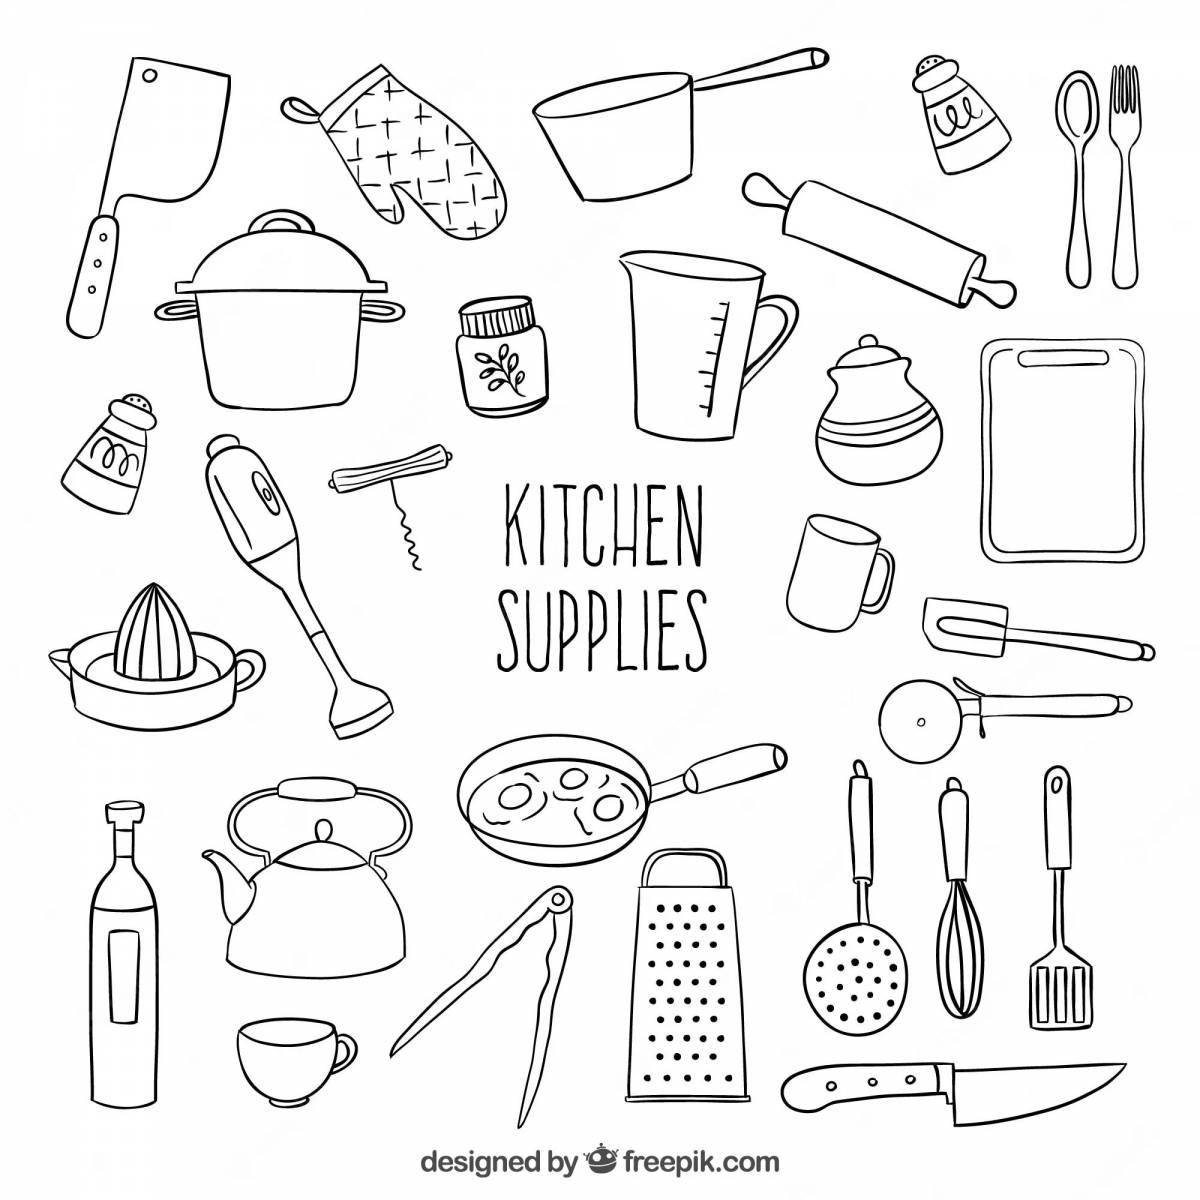 Wonderful kitchen utensils coloring book for babies